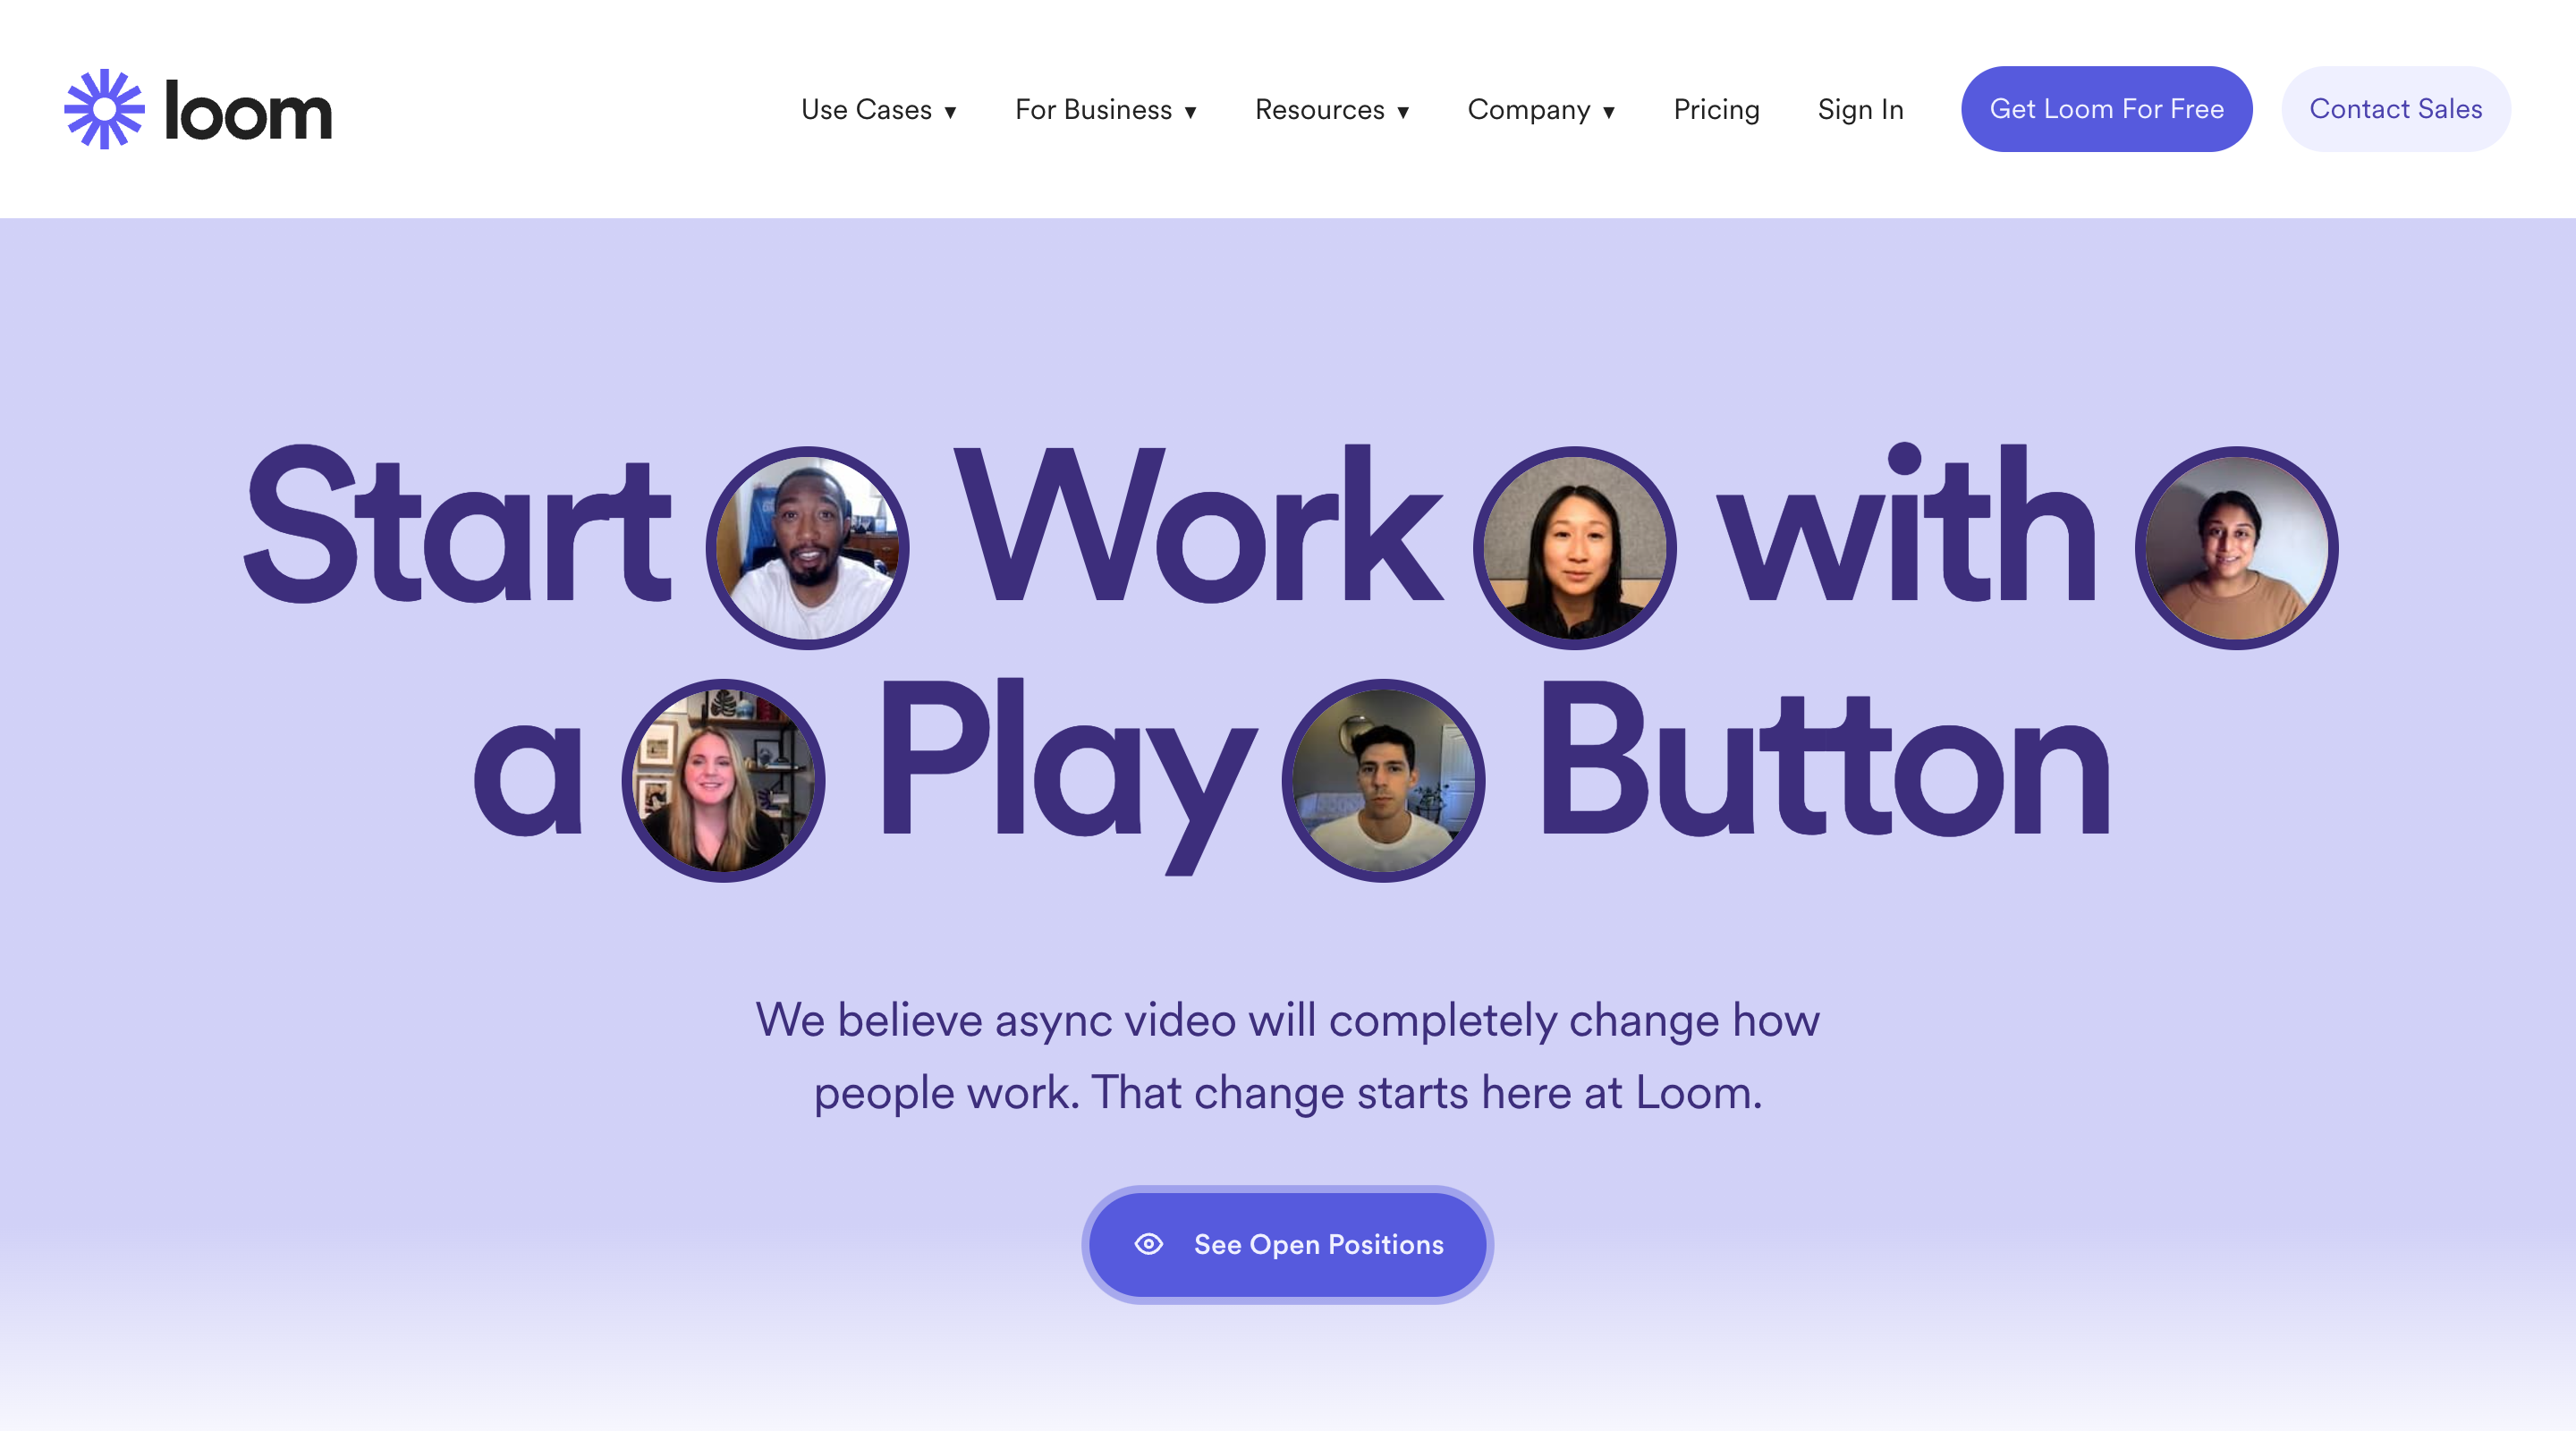 Screenshot of the Loom 'Careers' page. The header contains the Loom logo, main site navigation, and primary calls-to-action. The hero contains a large heading interspersed with circular avatar images. Underneath is a 'See Open Positions' button.